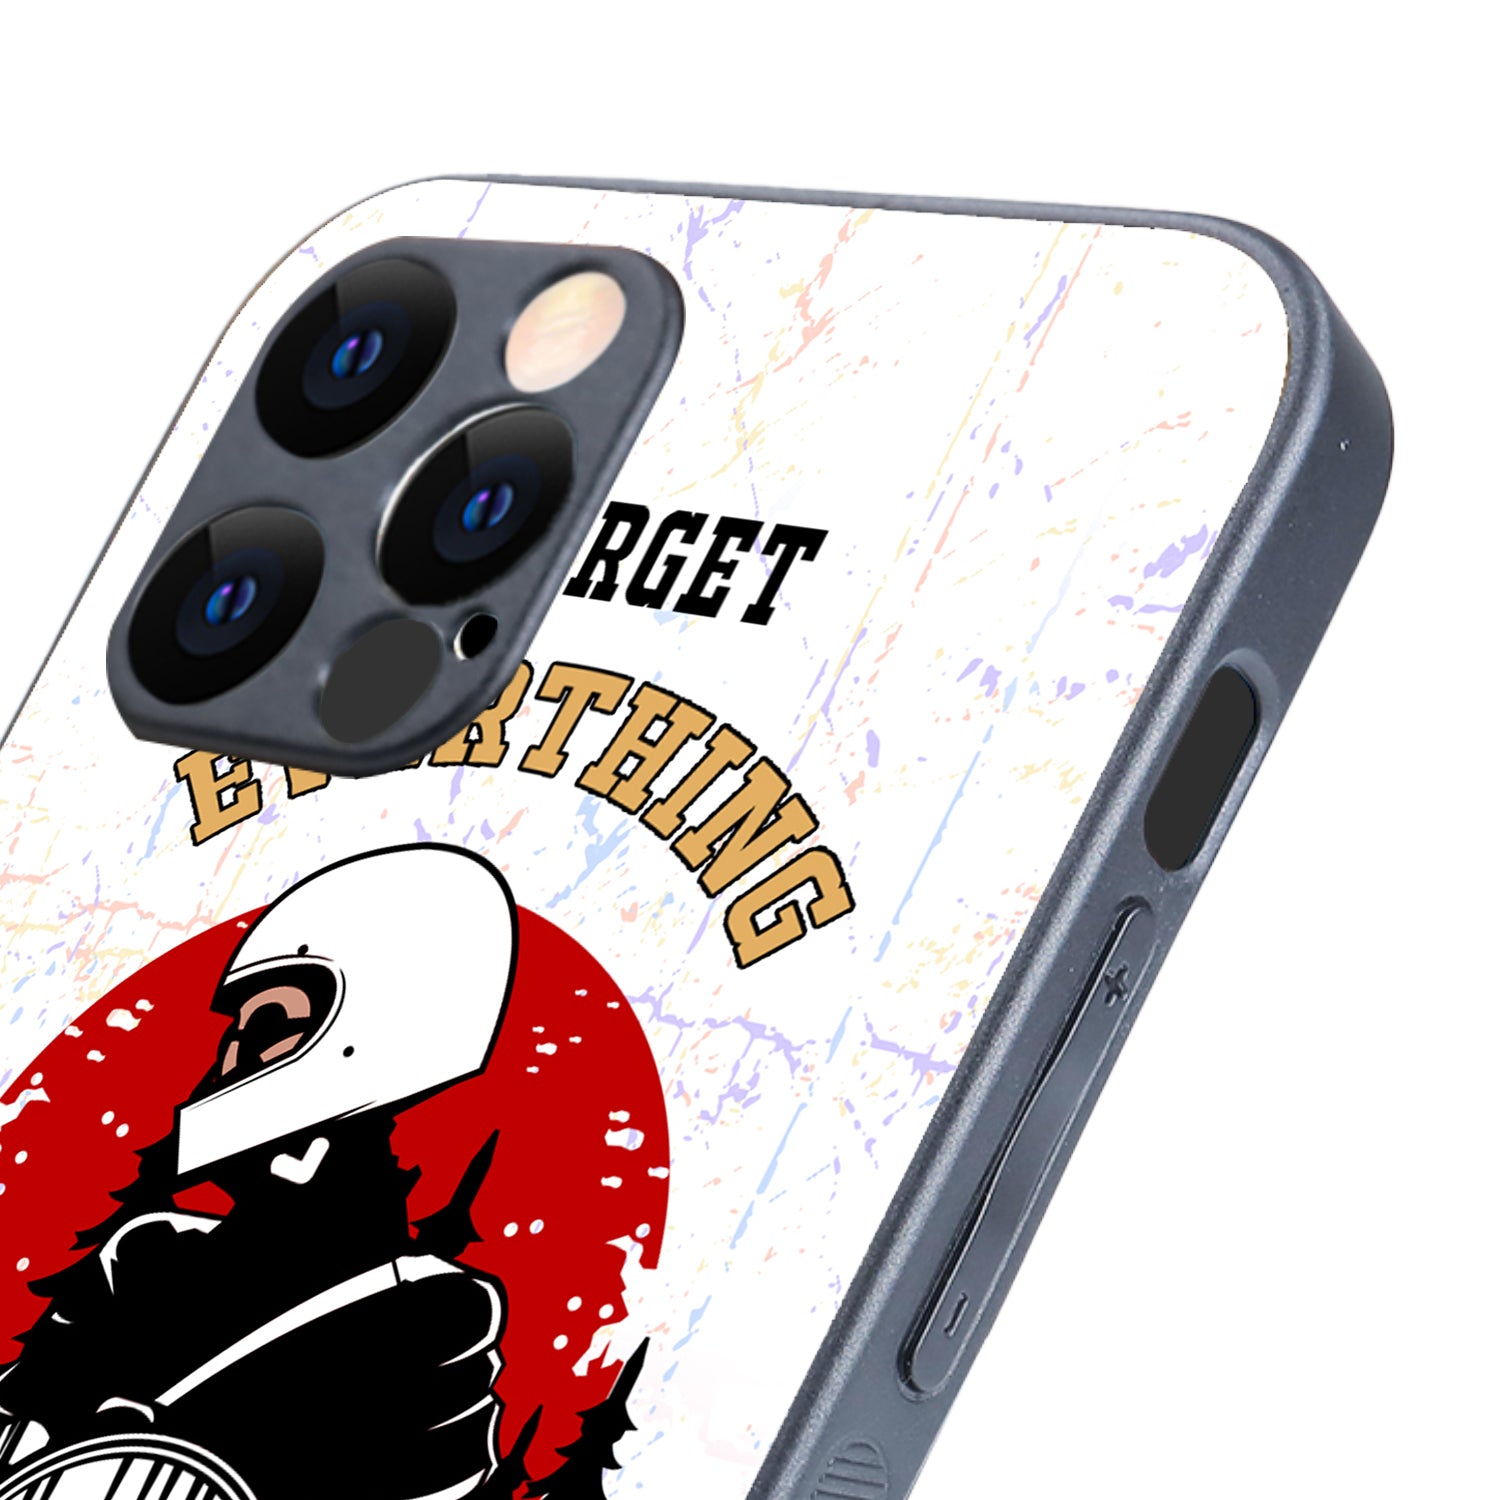 Forget Everything &amp; Ride Bike iPhone 12 Pro Case